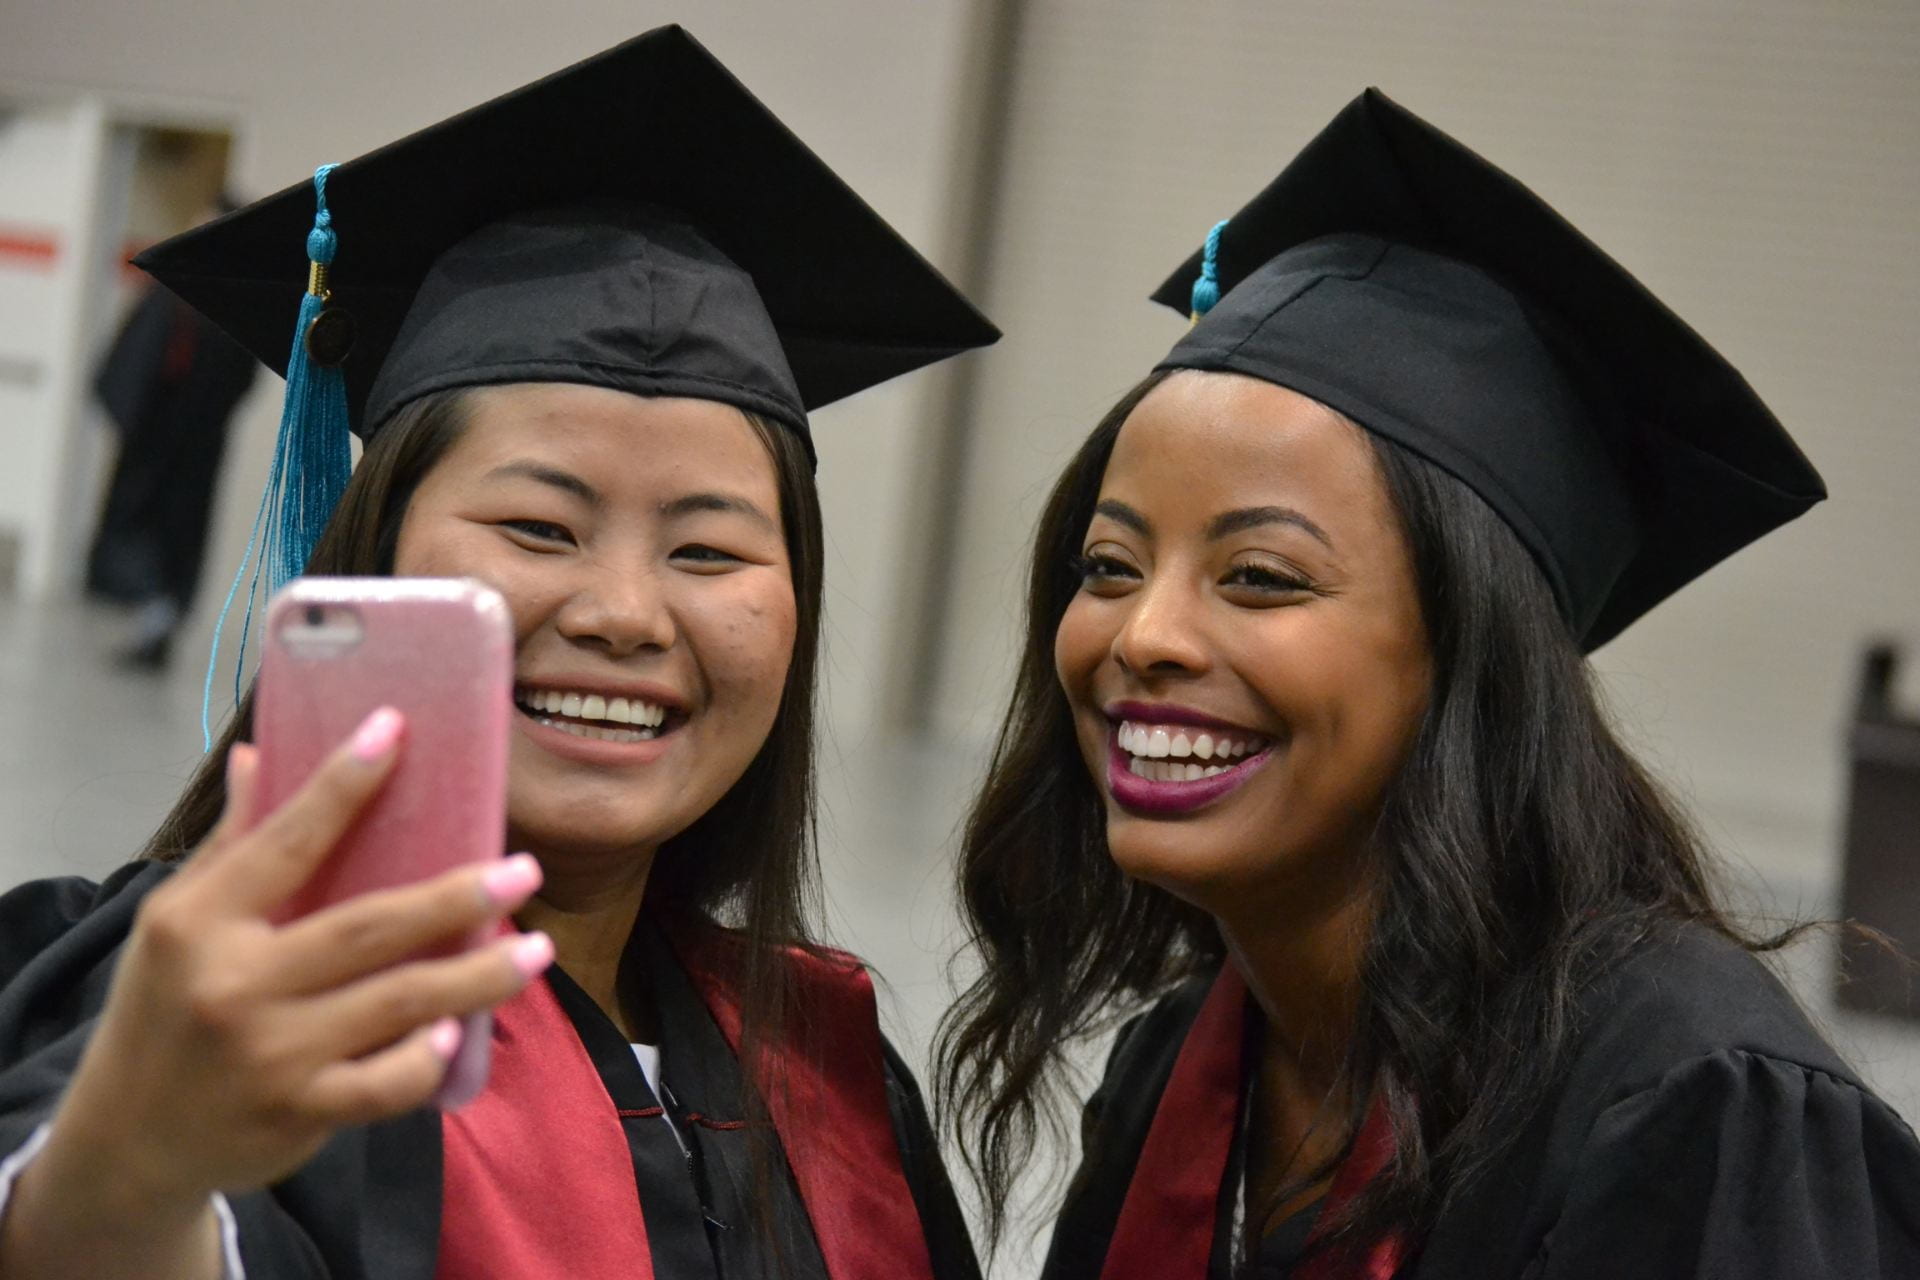 Two women in cap and gowns smile and take a picture at commencement.